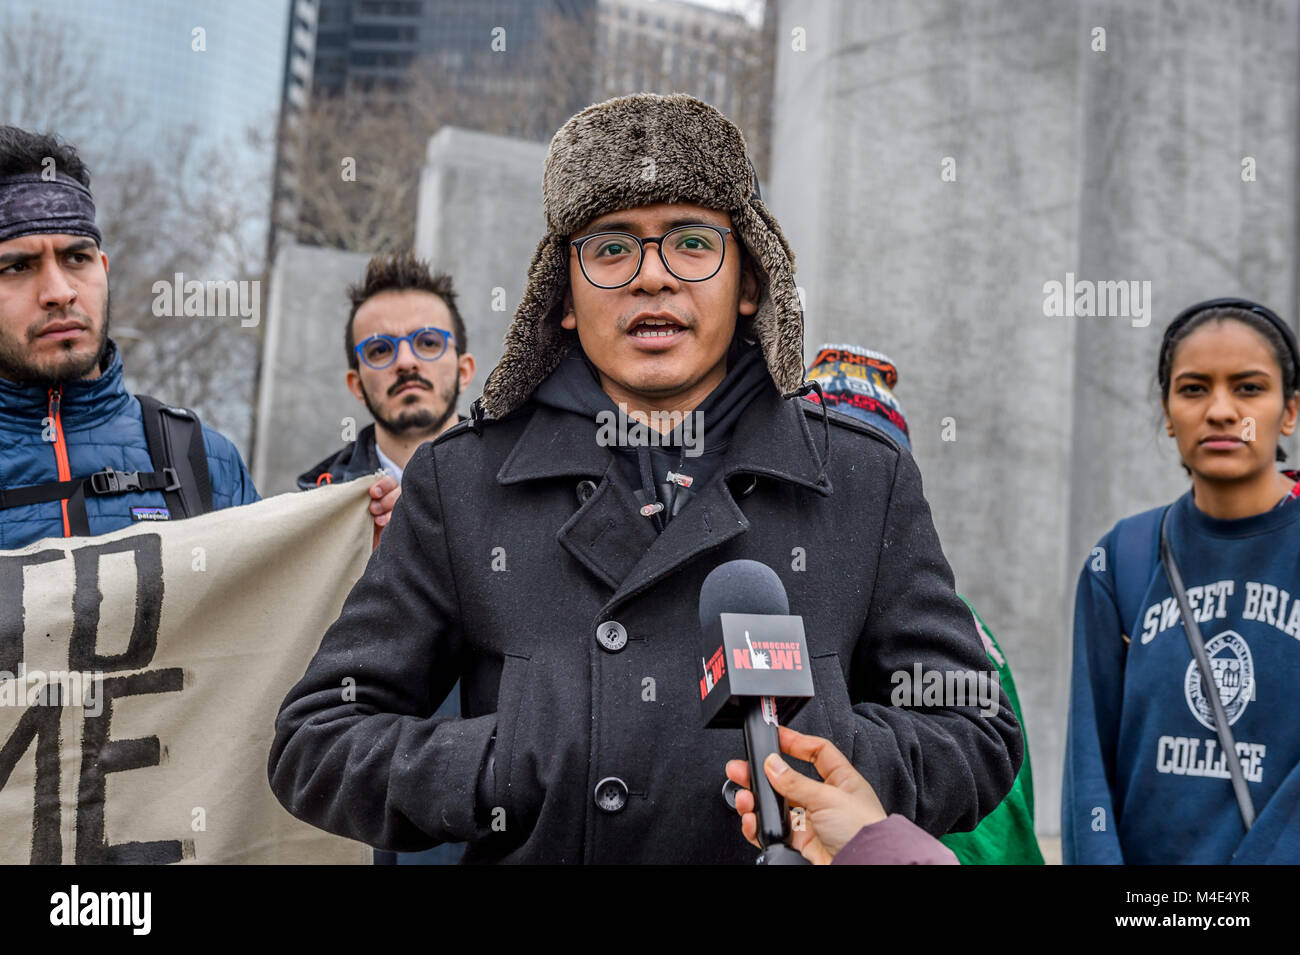 Li, 24, DACA recipient born in Mexico and raised in New Jersey - On February 15, 2018; 11 undocumented youth and allies began The Walk to Stay Home, a 15-day walk from New York City's Battery Park to Washington, DC's Martin Luther King Jr. memorial. The 250-mile journey has been organized by the Seed Project with the support of the #OurDream Campaign to draw attention to the need for a clean Dream Act that not only grants permanent protection for undocumented youth but does not harm 11 million undocumented people living and working in the United States. (Photo by Erik McGregor/Pacific Press Stock Photo